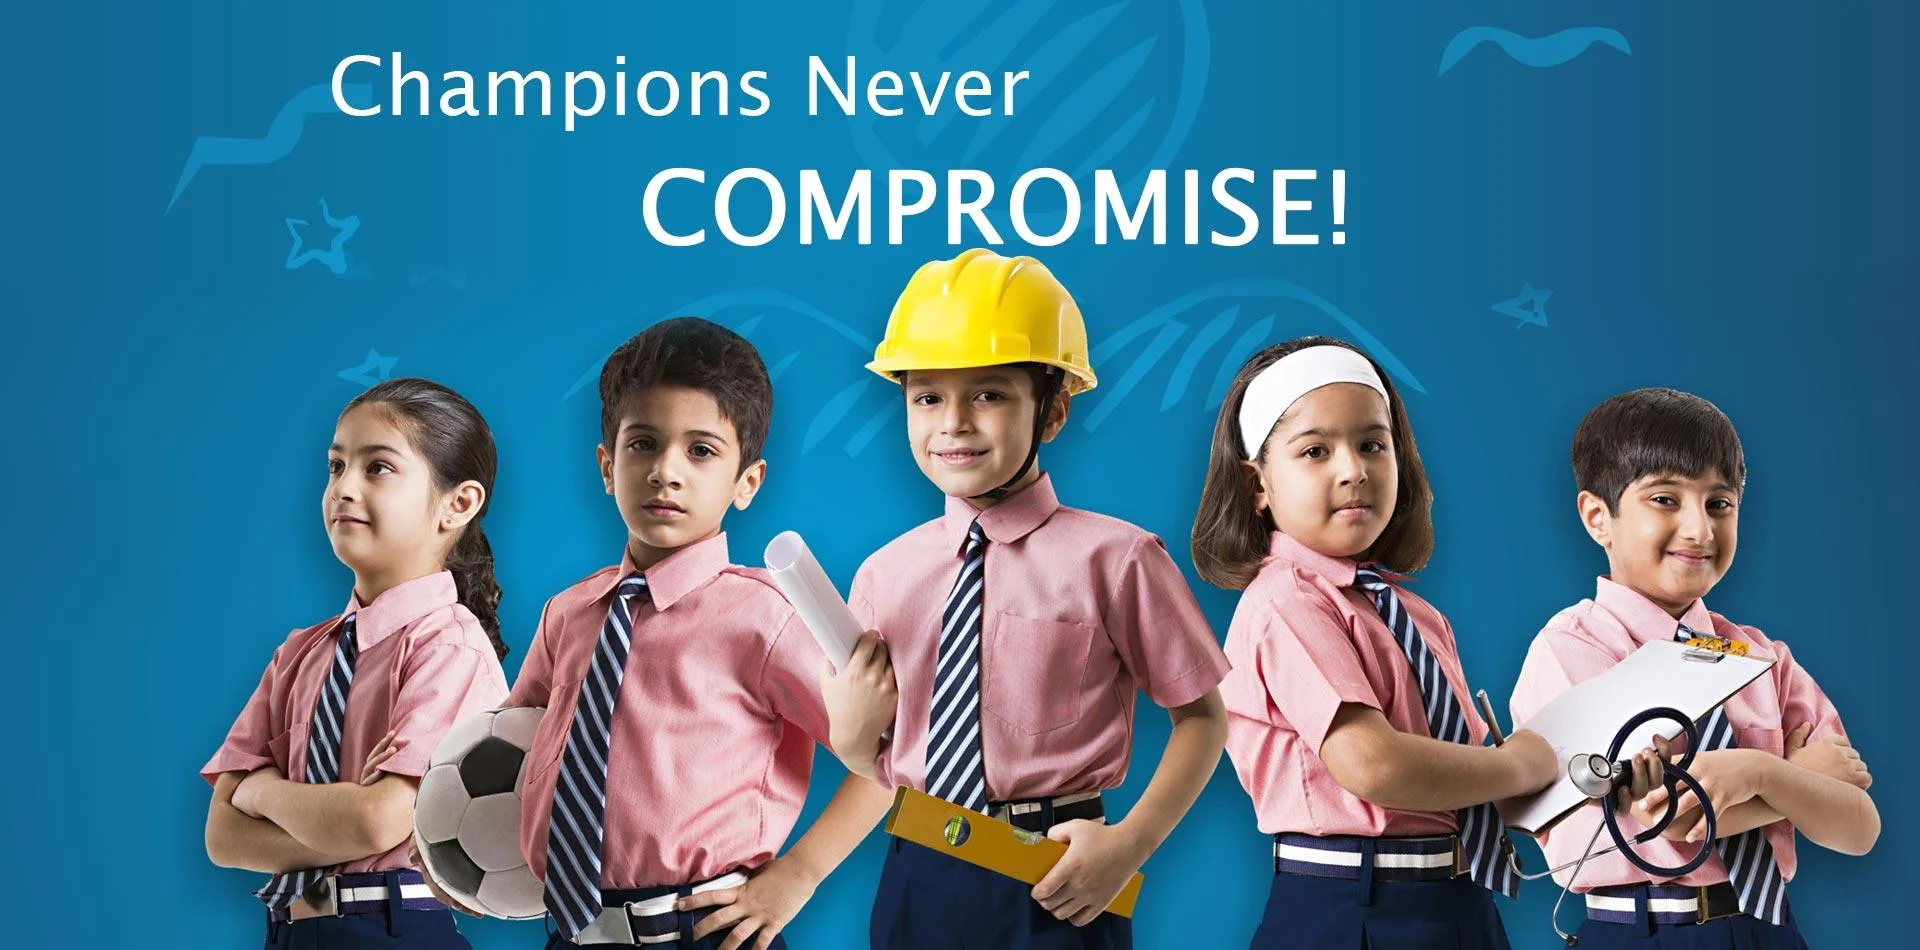 Champion Never compromise